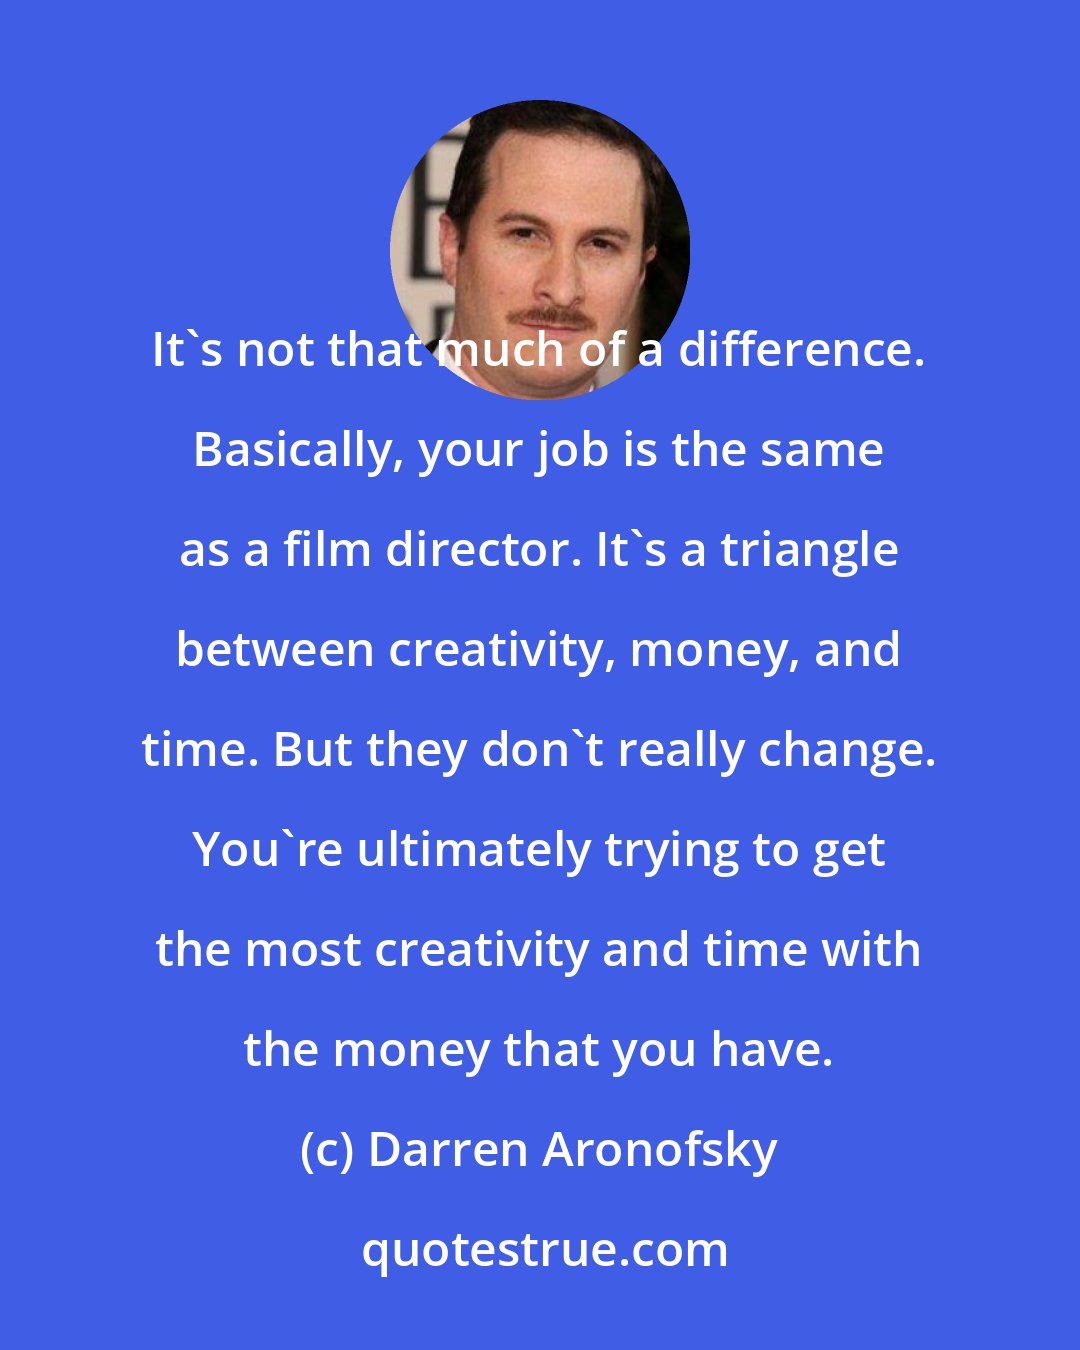 Darren Aronofsky: It's not that much of a difference. Basically, your job is the same as a film director. It's a triangle between creativity, money, and time. But they don't really change. You're ultimately trying to get the most creativity and time with the money that you have.